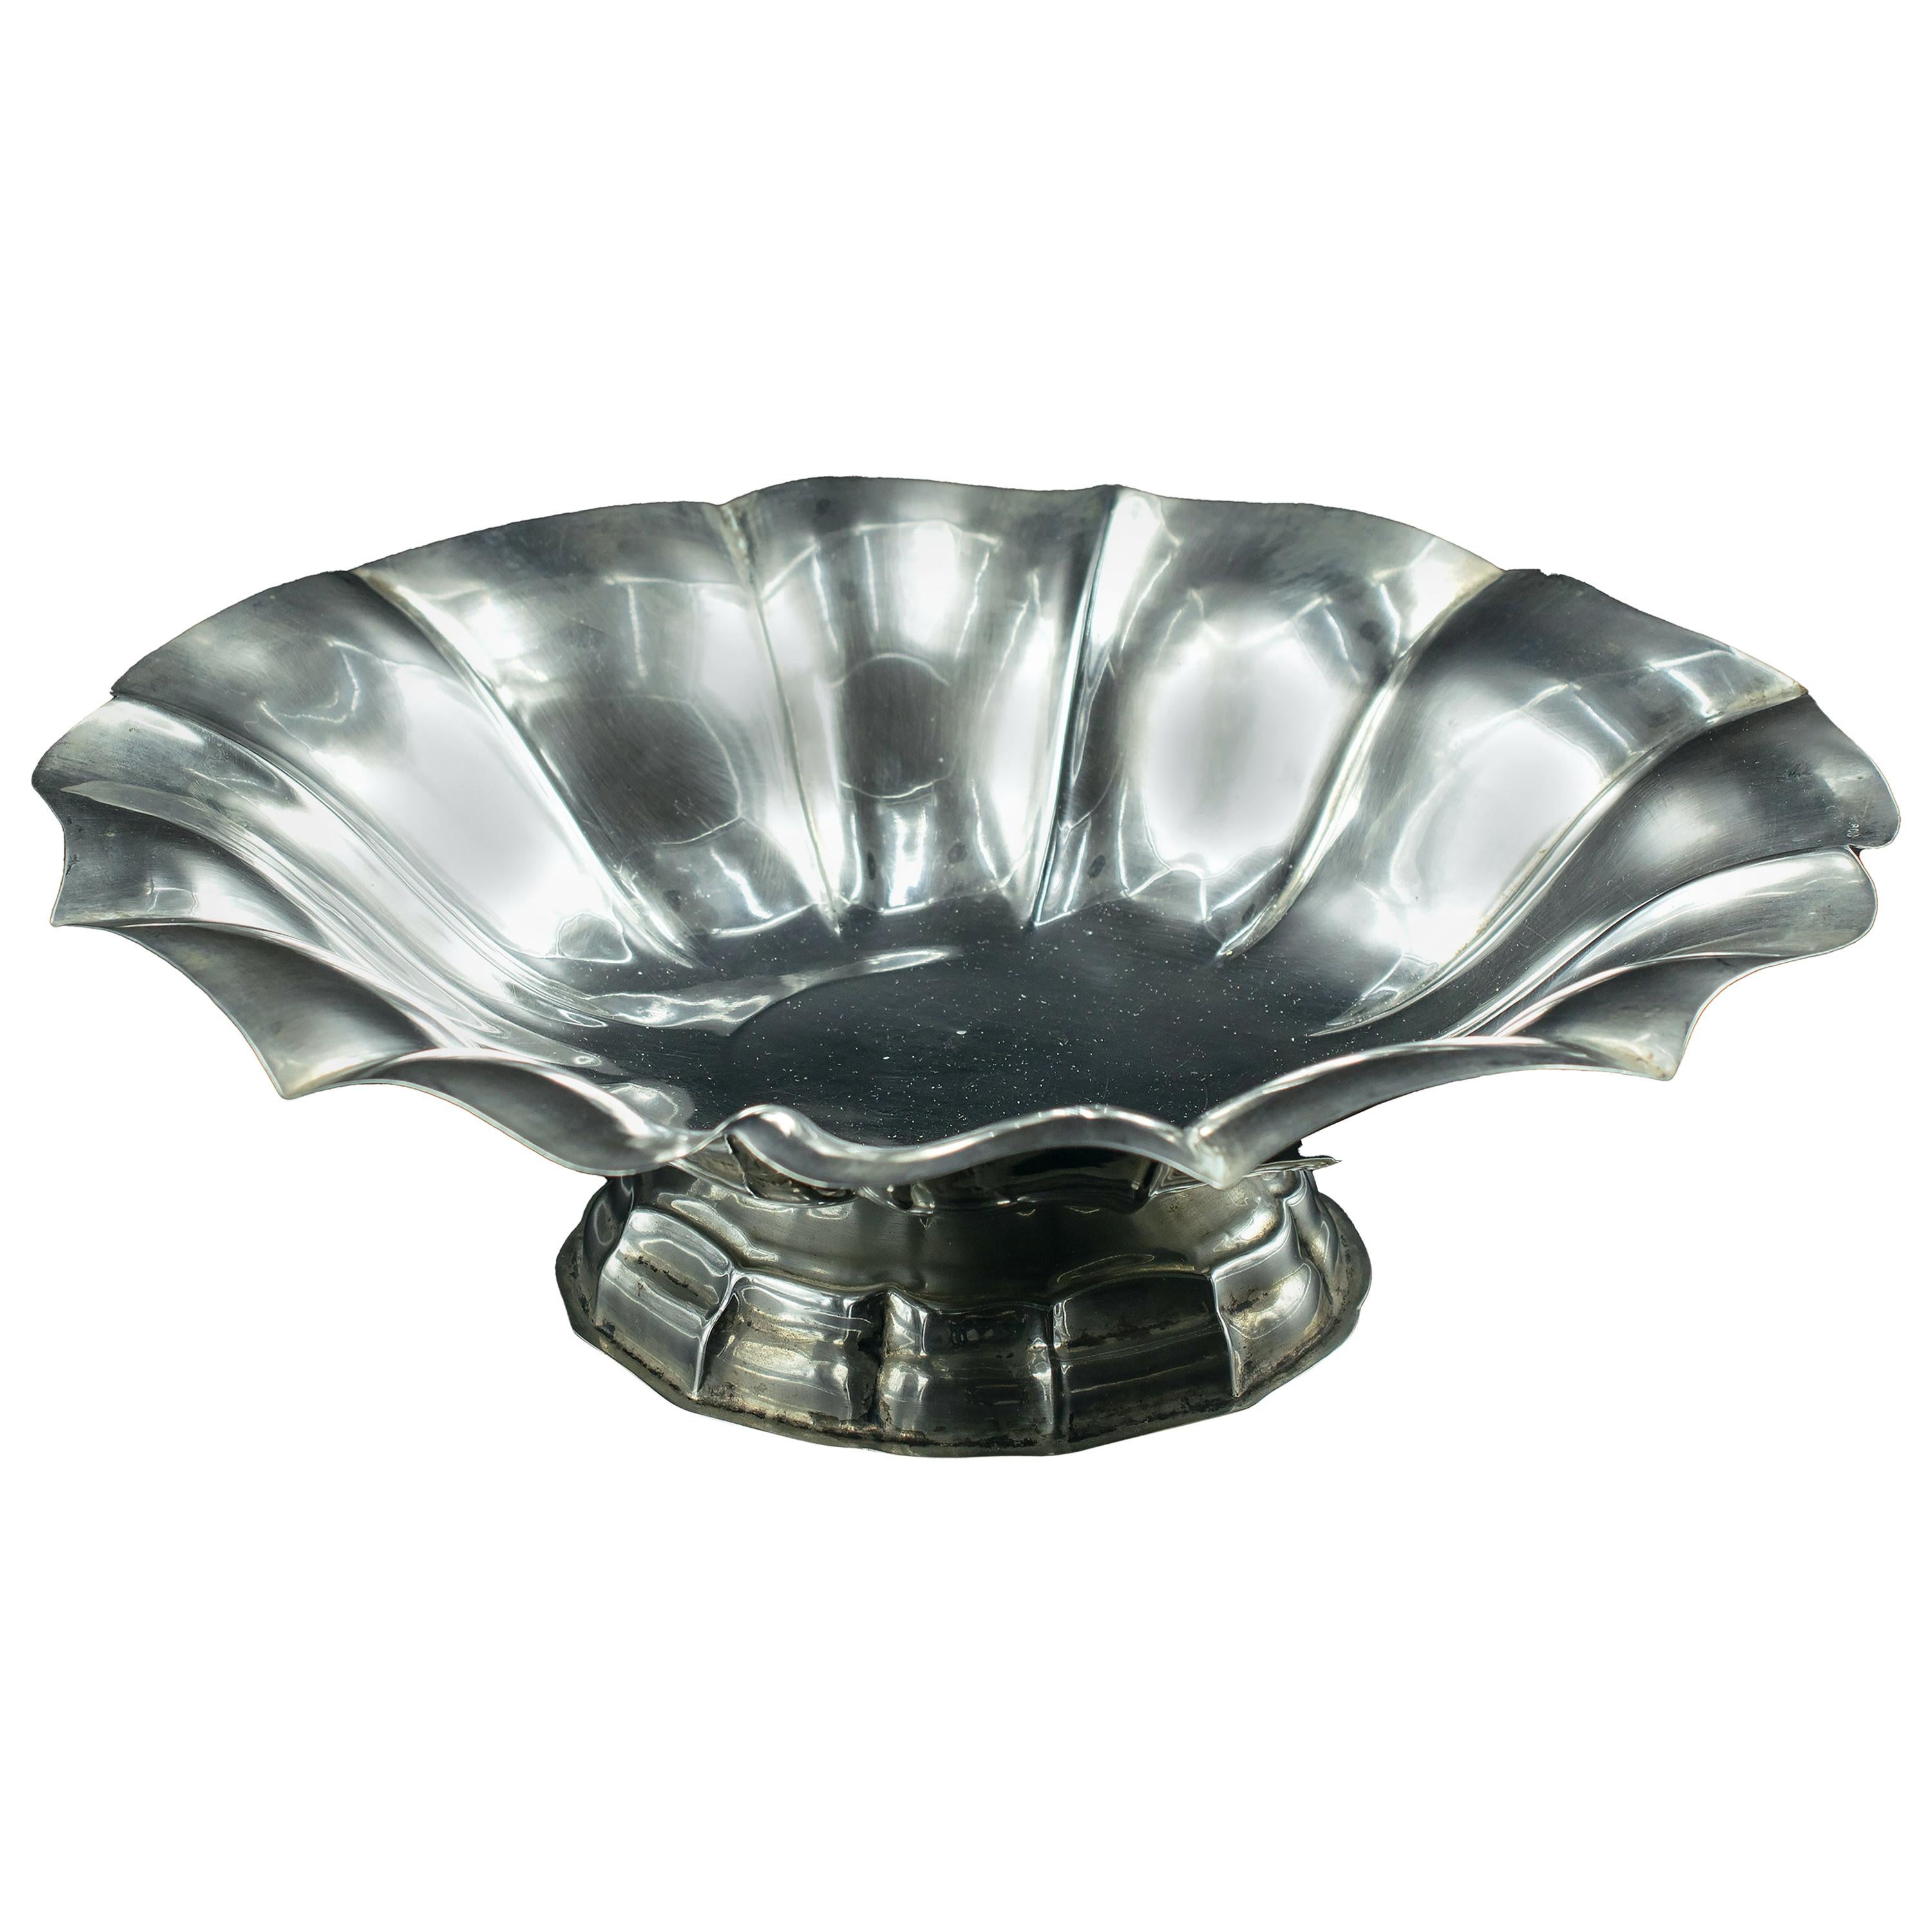 Vintage Silver Centerpiece, Italy, Mid-20th Century For Sale